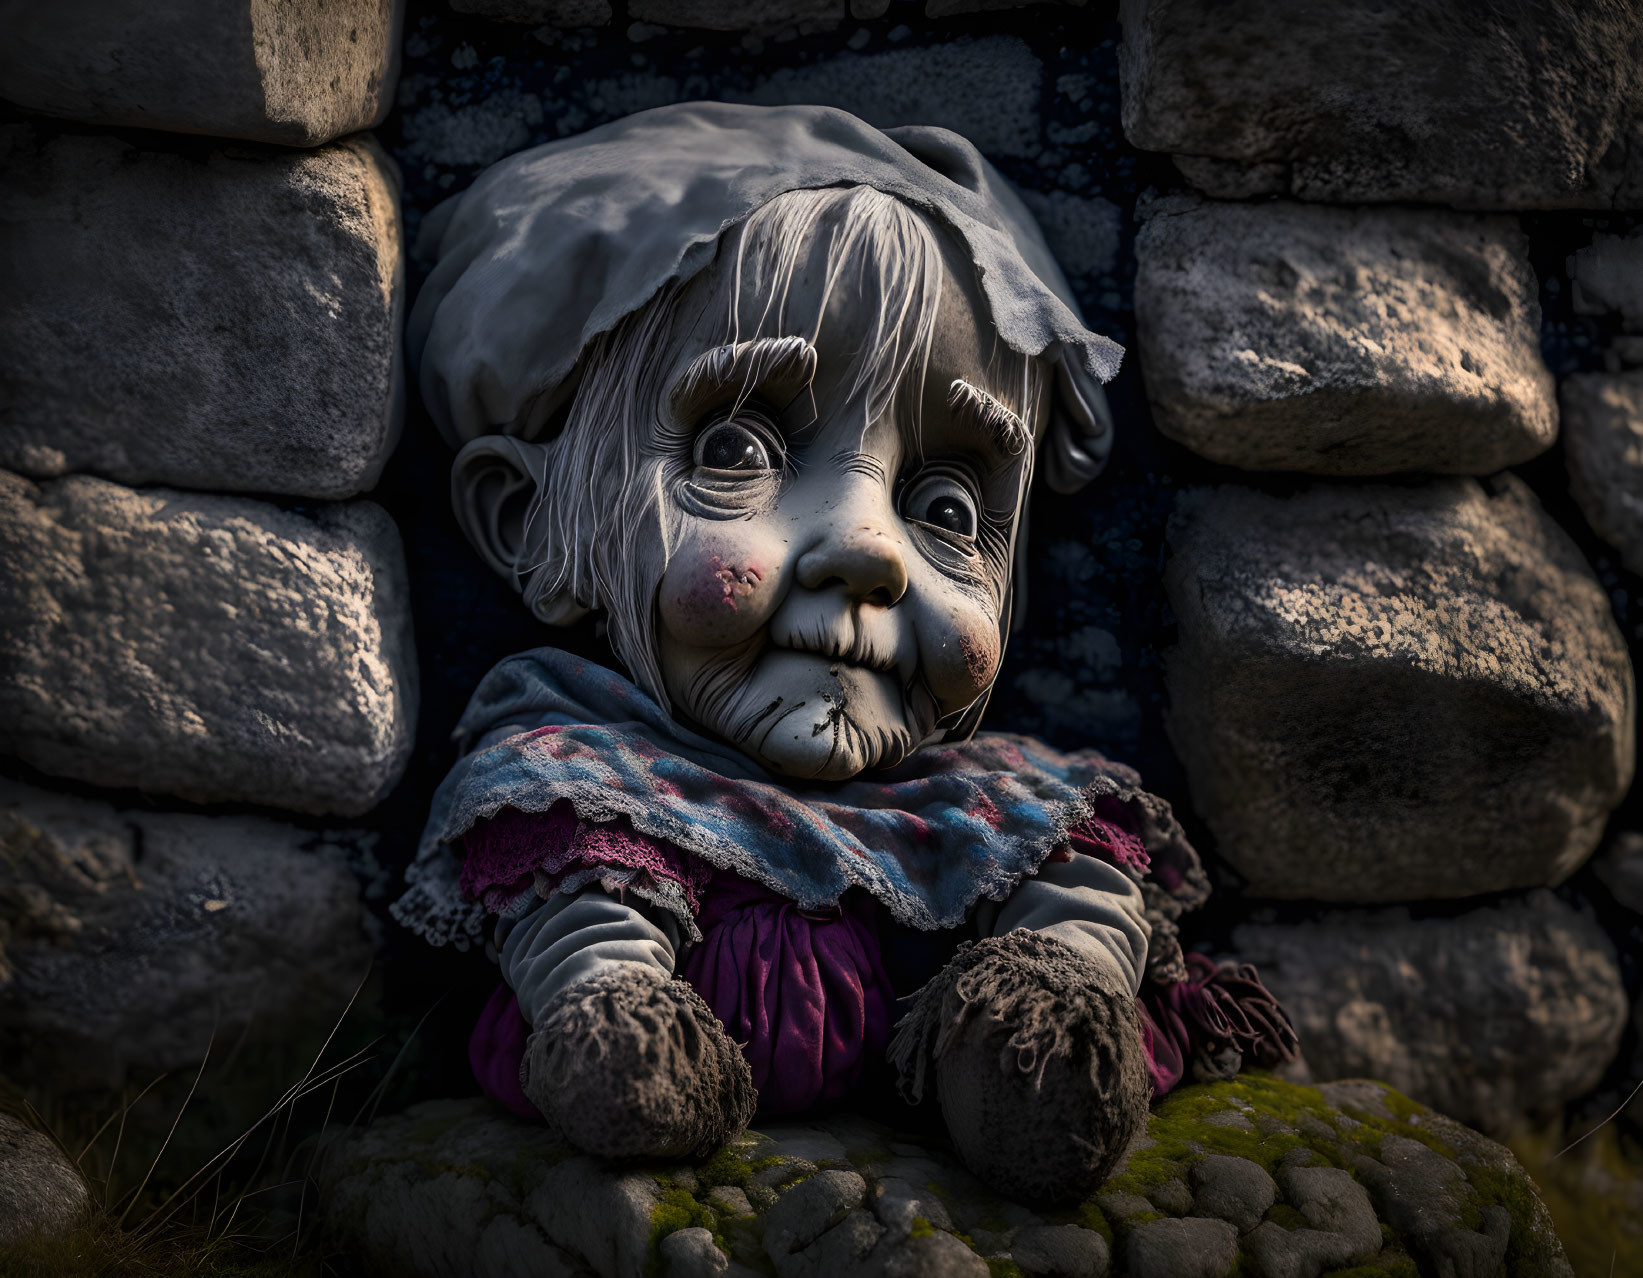 Hyperrealistic Doll in Bonnet and Colorful Clothes Sitting Against Stone Wall